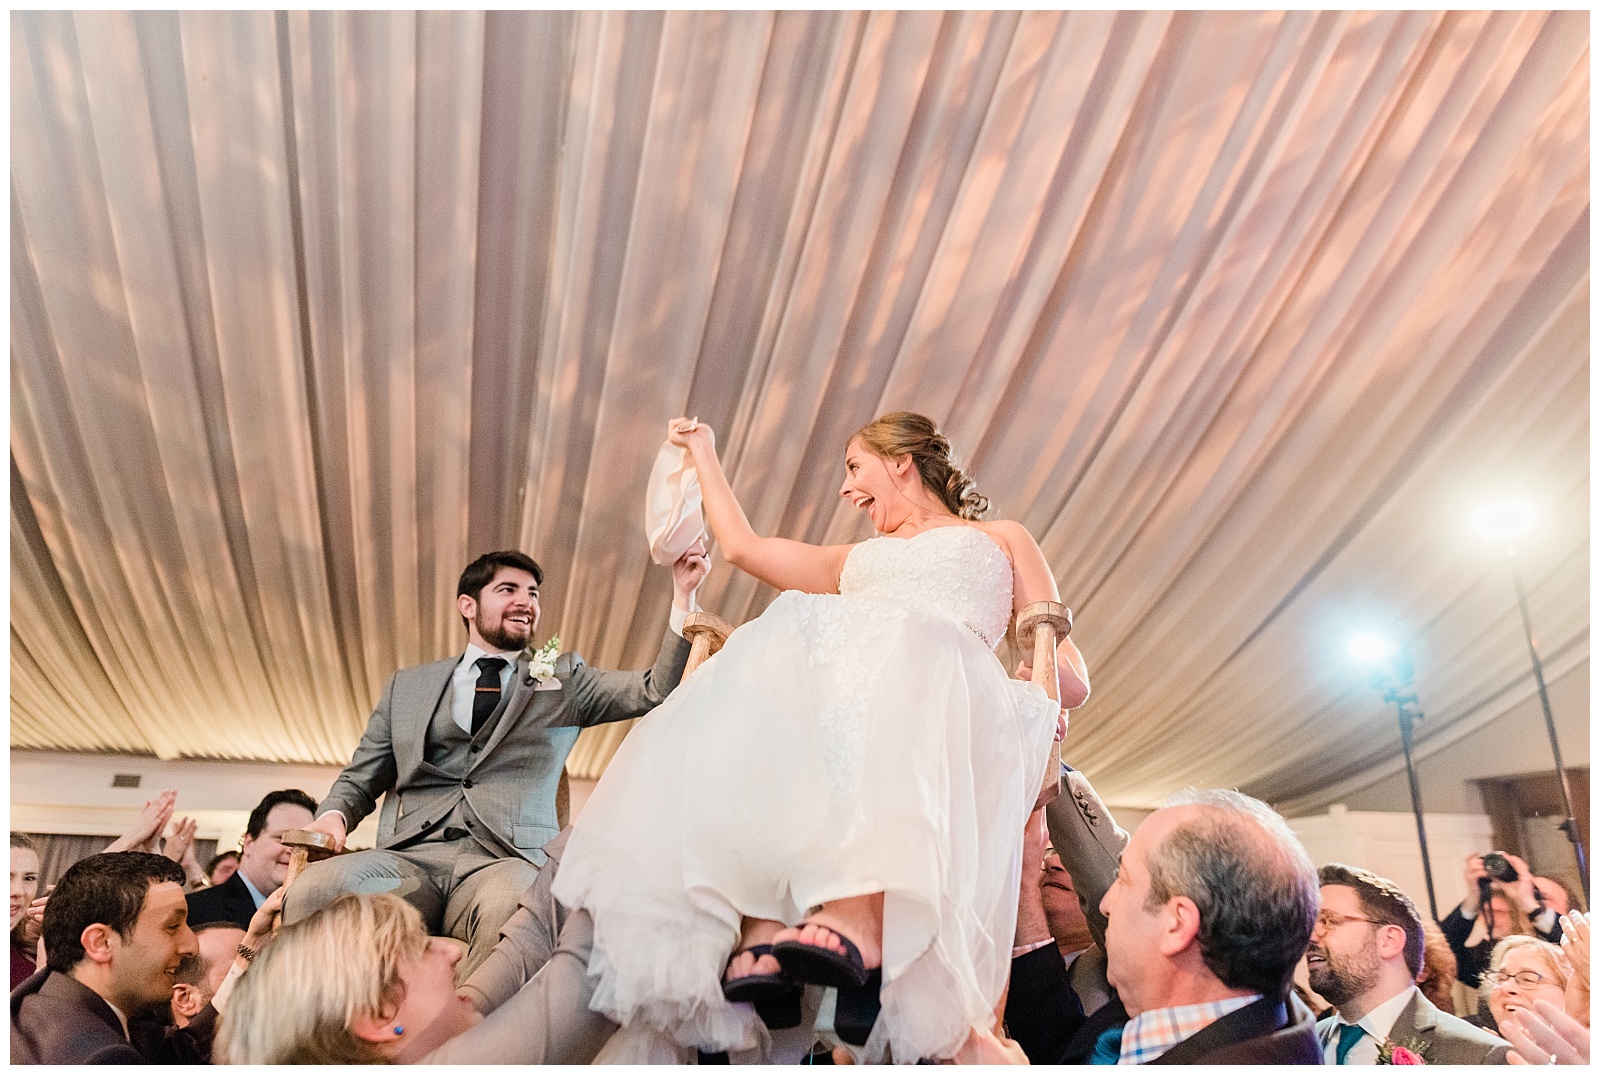 Bride and groom hold a napkin while being lifted on chairs for the Jewish hora dance at their wedding.